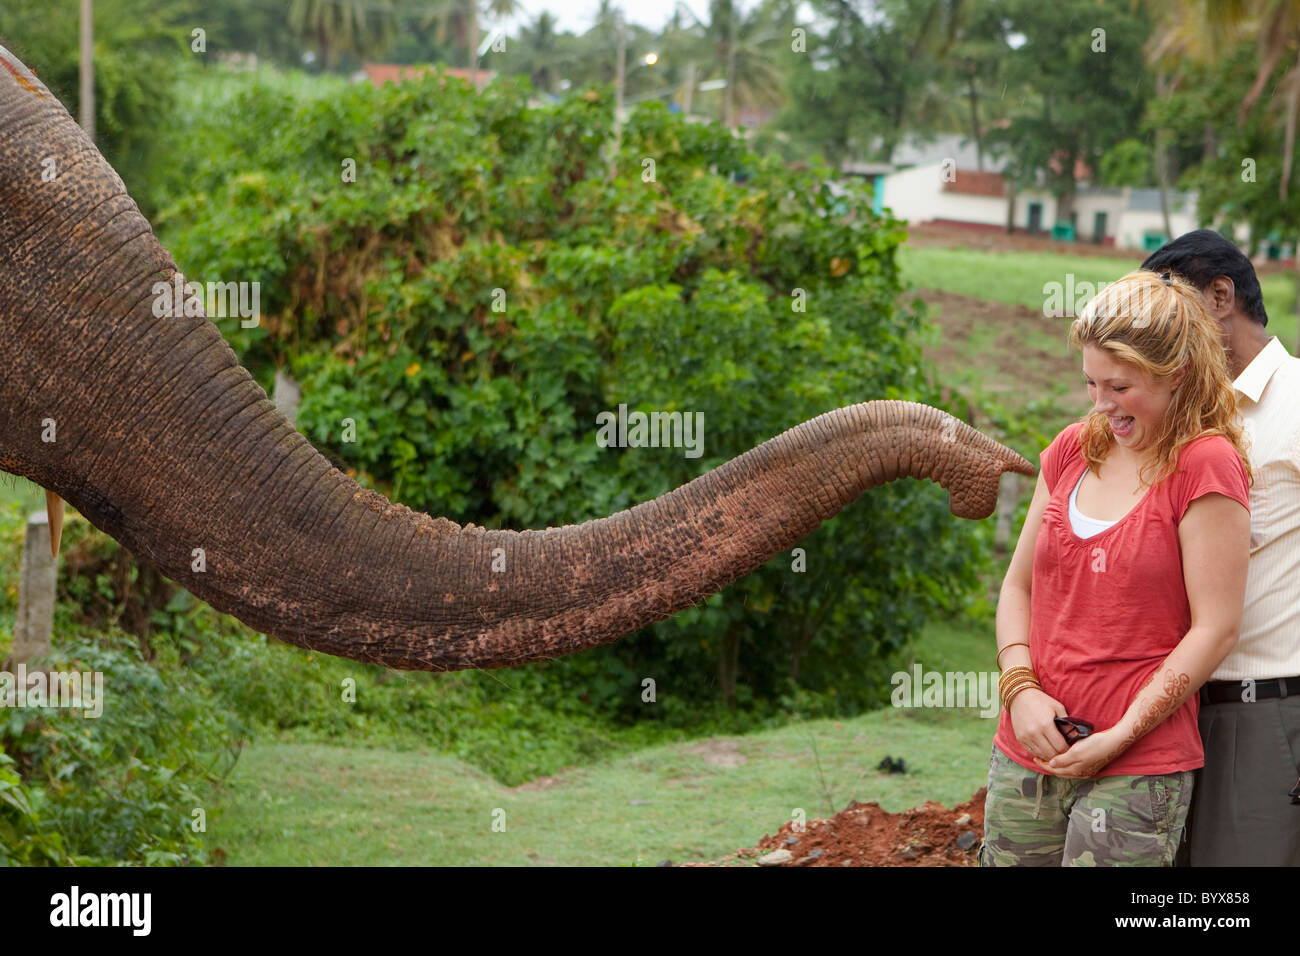 a look of surprise on a woman's face as a traditional holy elephant's trunk comes towards her in blessing; tamil nadu, india Stock Photo